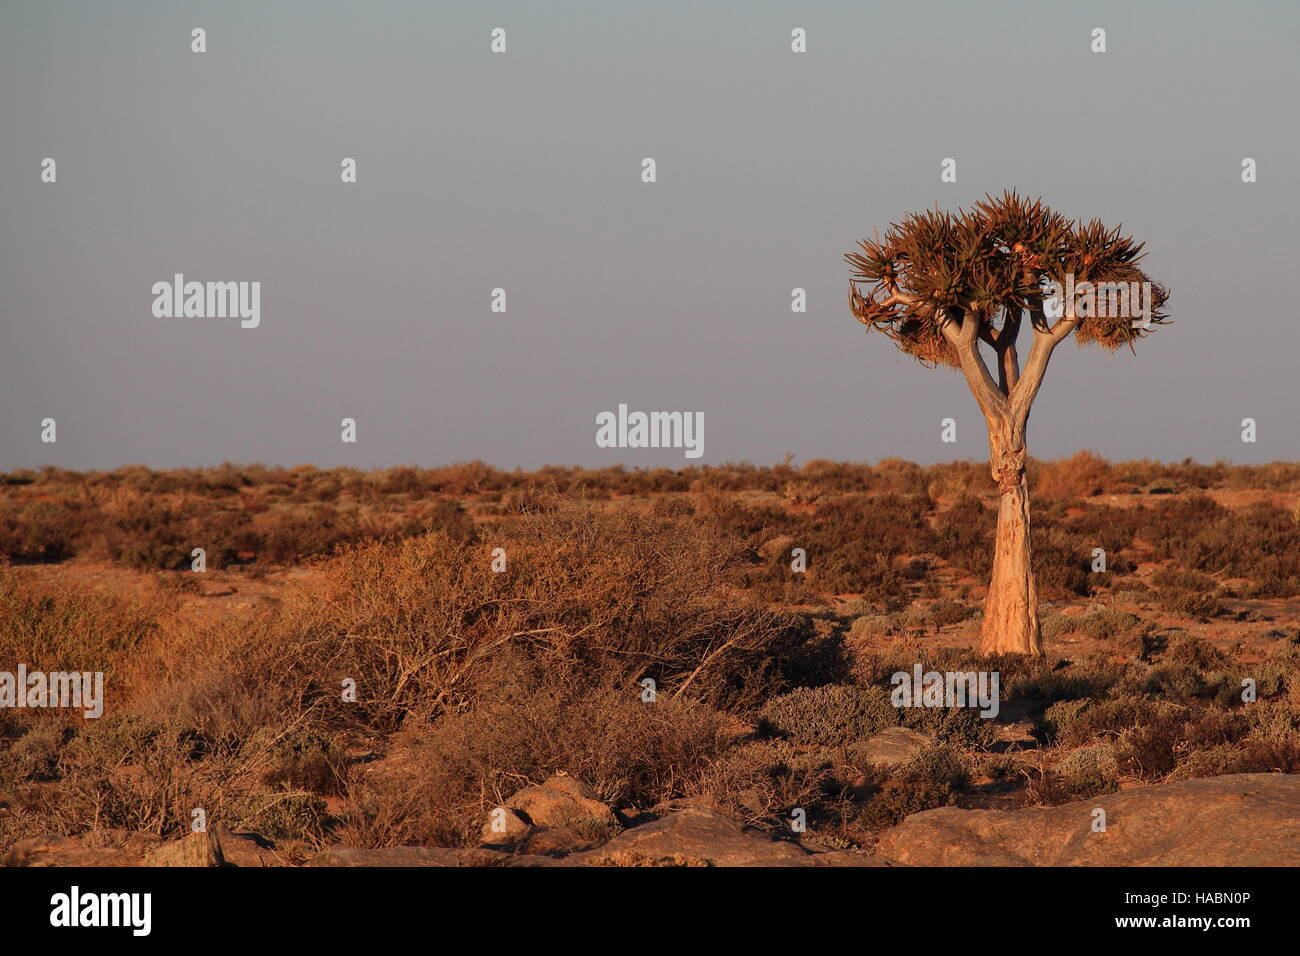 The arid and sparsely vegetated landscape with a lone quiver tree in the Namaqualand region in South Africa image with copy space in landscape format Stock Photo